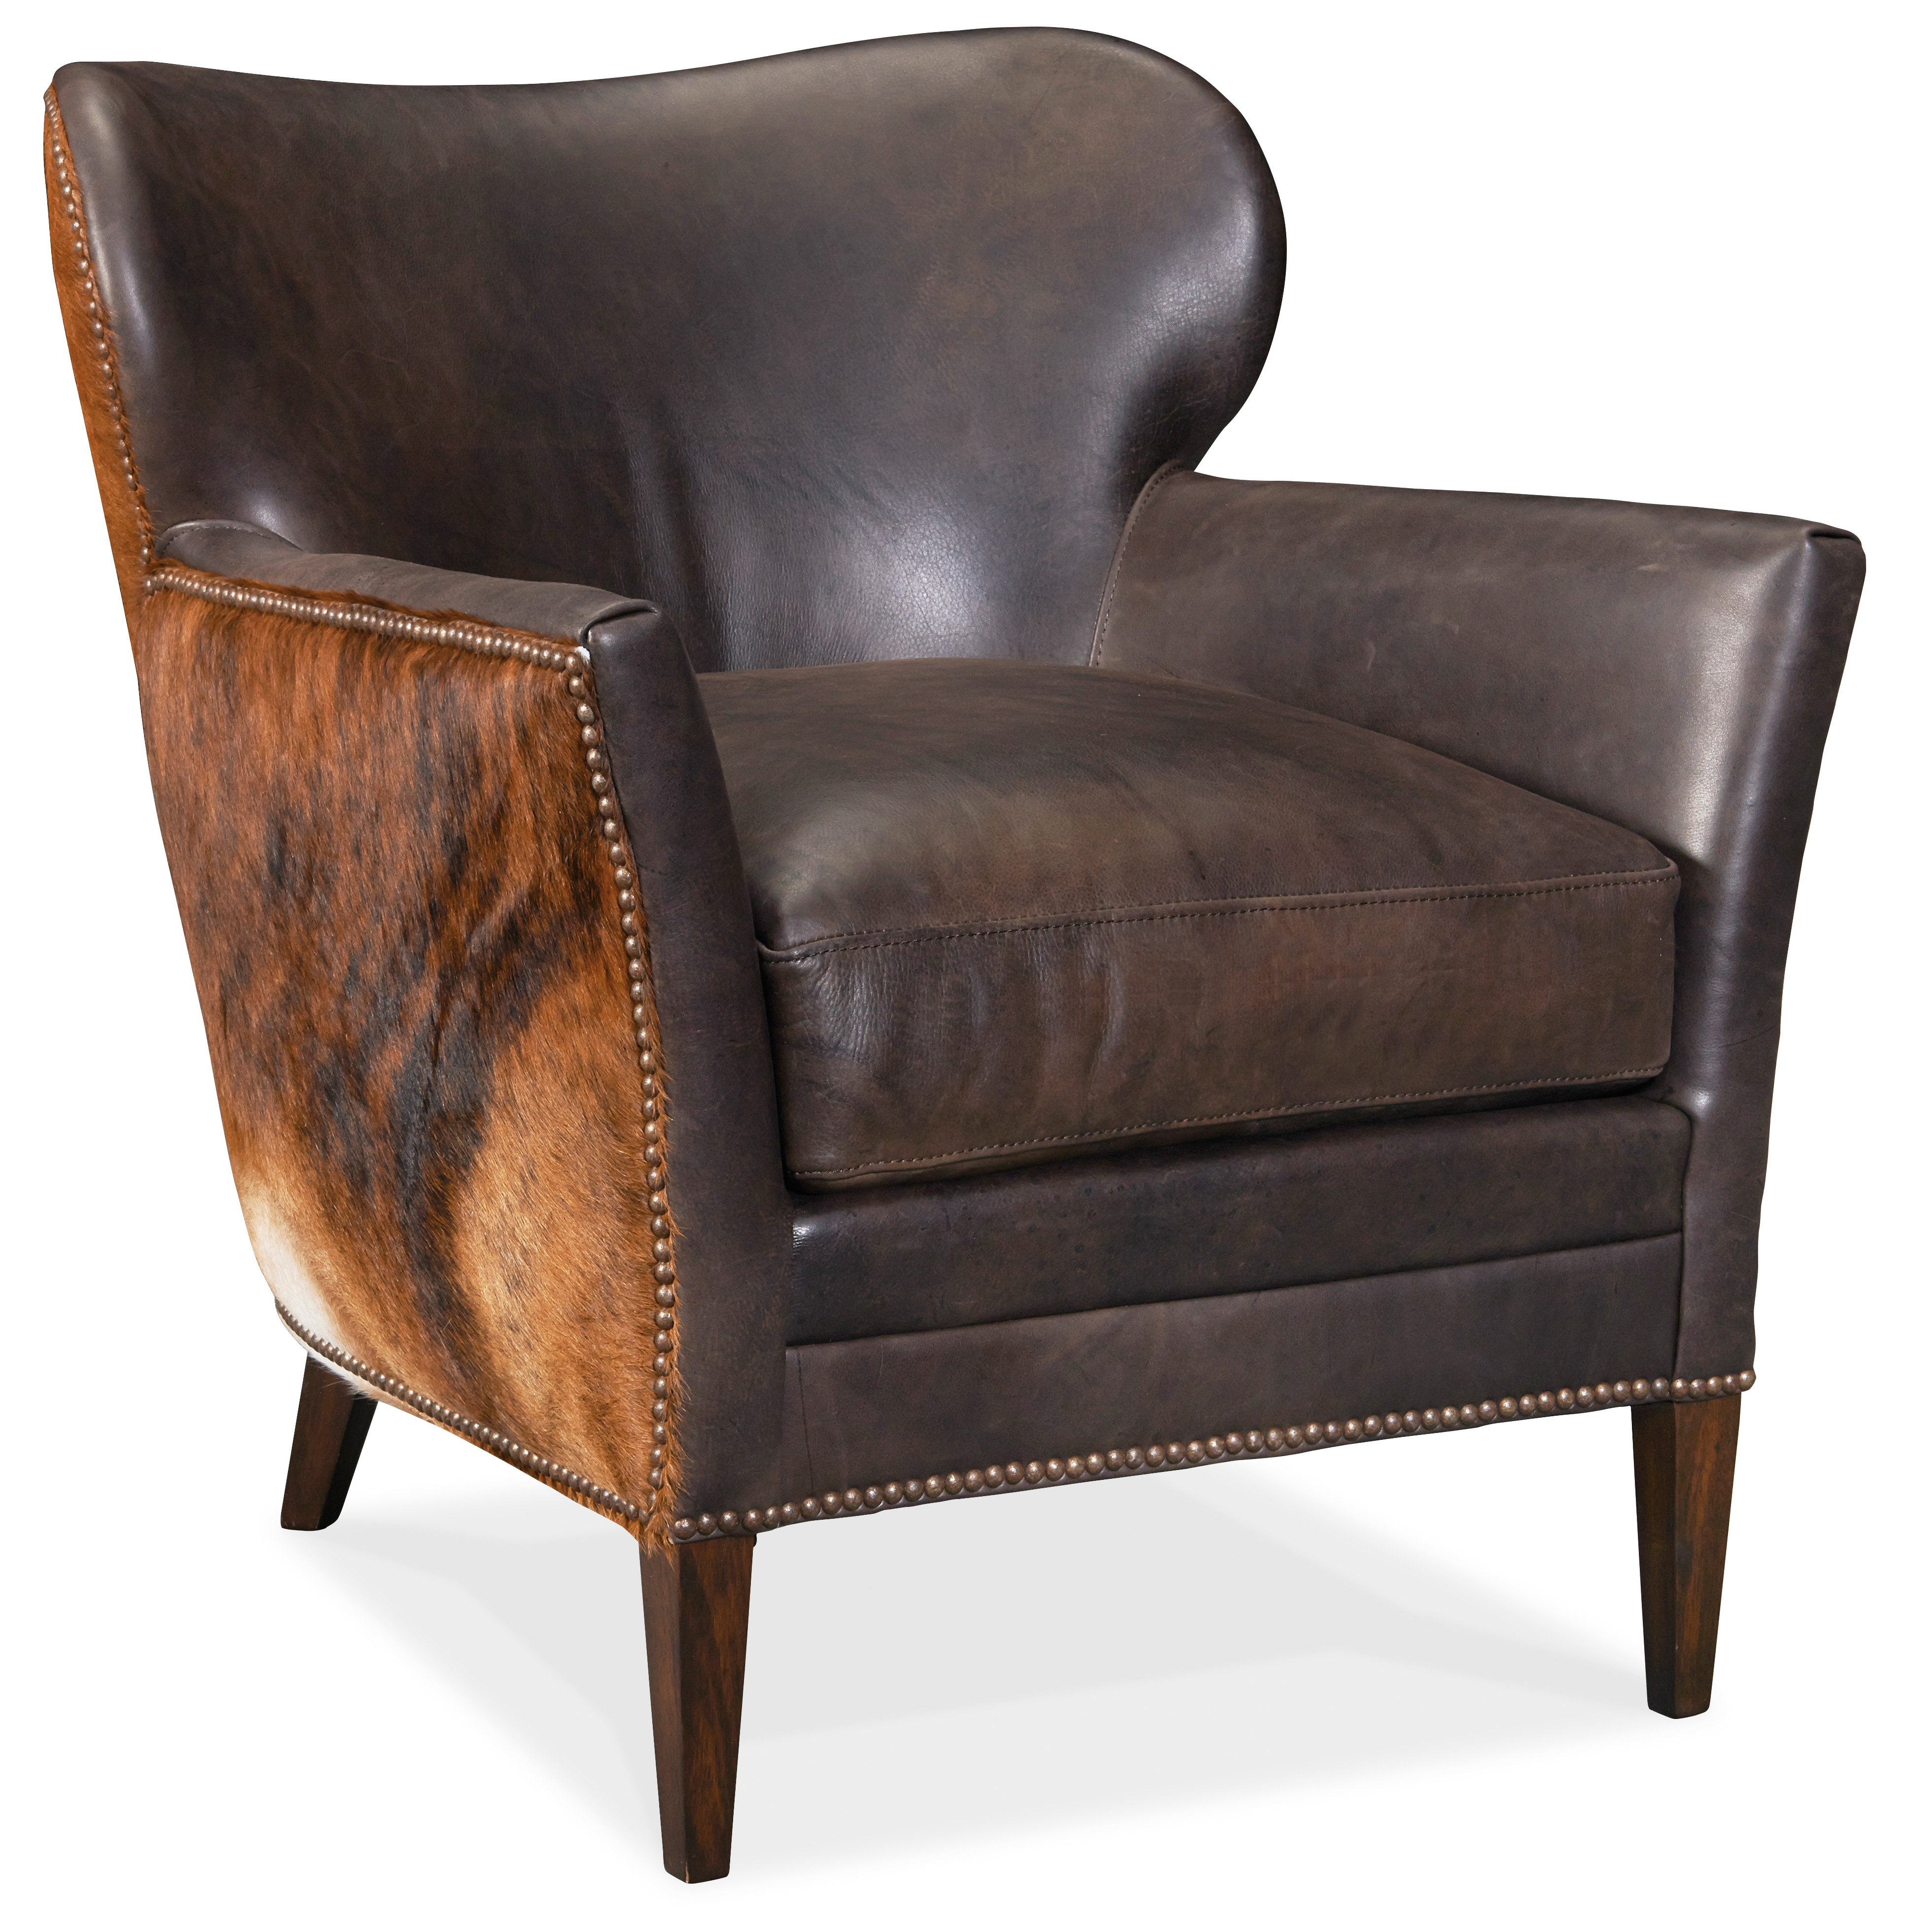 Picture of Kato Leather Club Chair